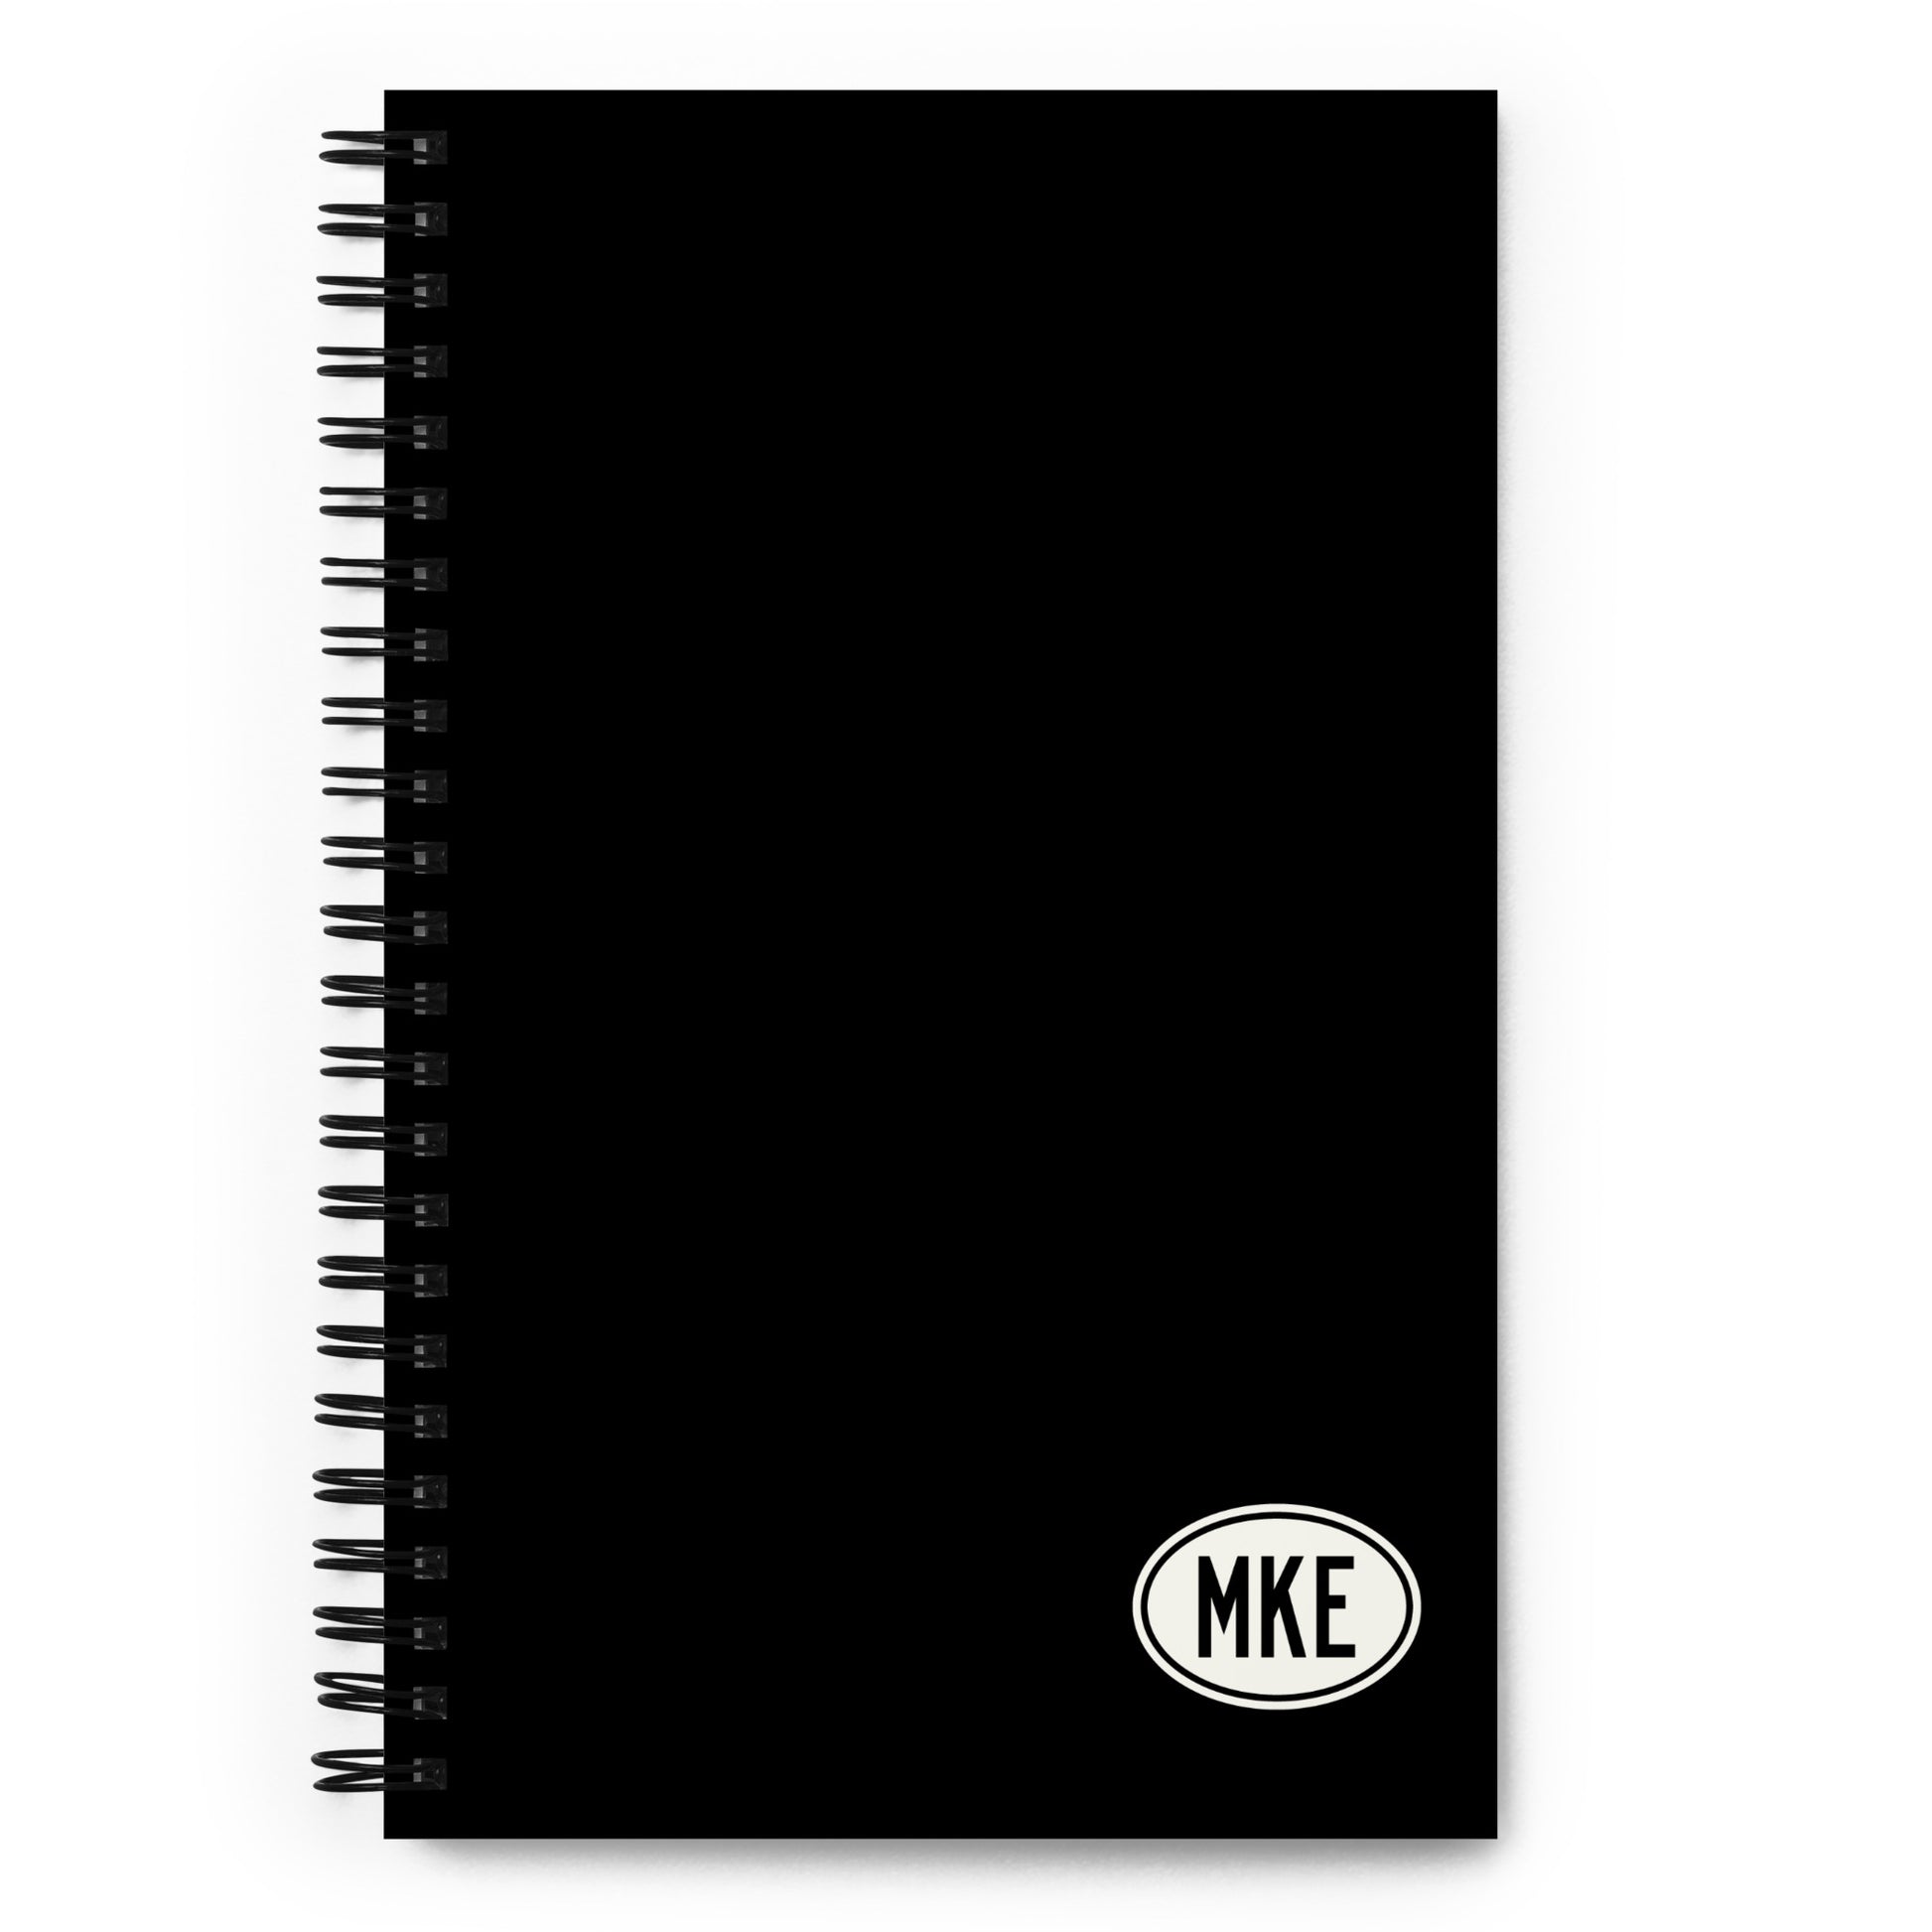 Unique Travel Gift Spiral Notebook - White Oval • MKE Milwaukee • YHM Designs - Image 01